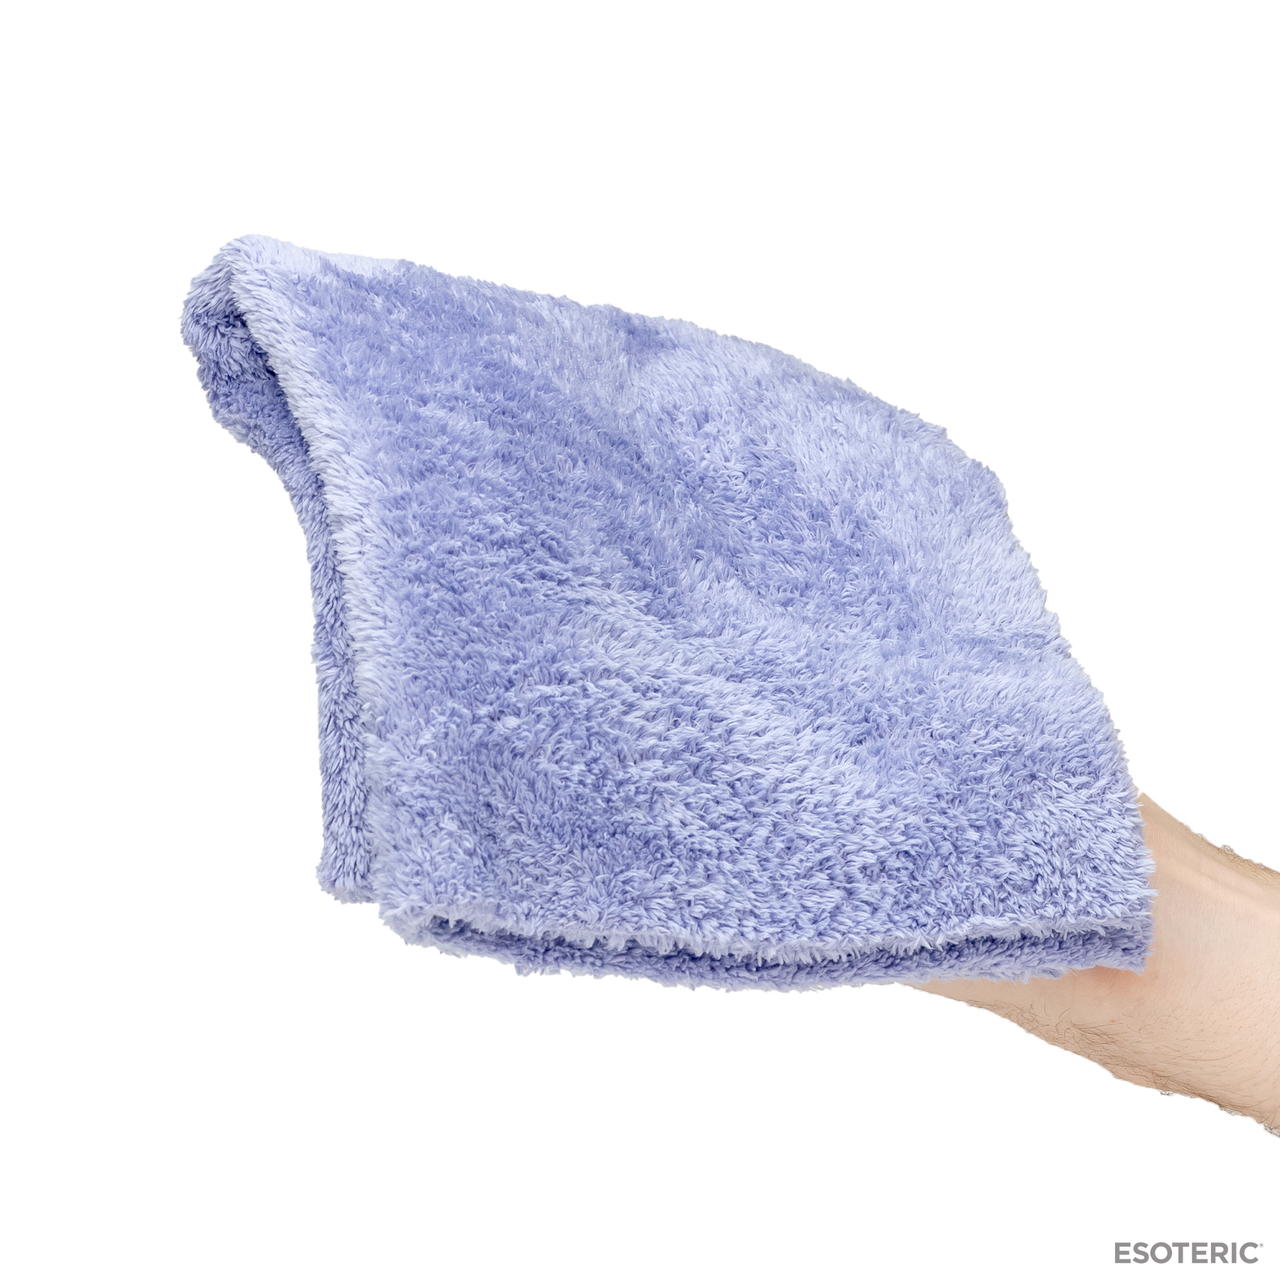 https://cdn11.bigcommerce.com/s-ioee6uc/images/stencil/1280x1280/products/964/6348/The_Rag_Company_Lavender_350gsm_Edgeless_Towel__61910.1663272560.png?c=2